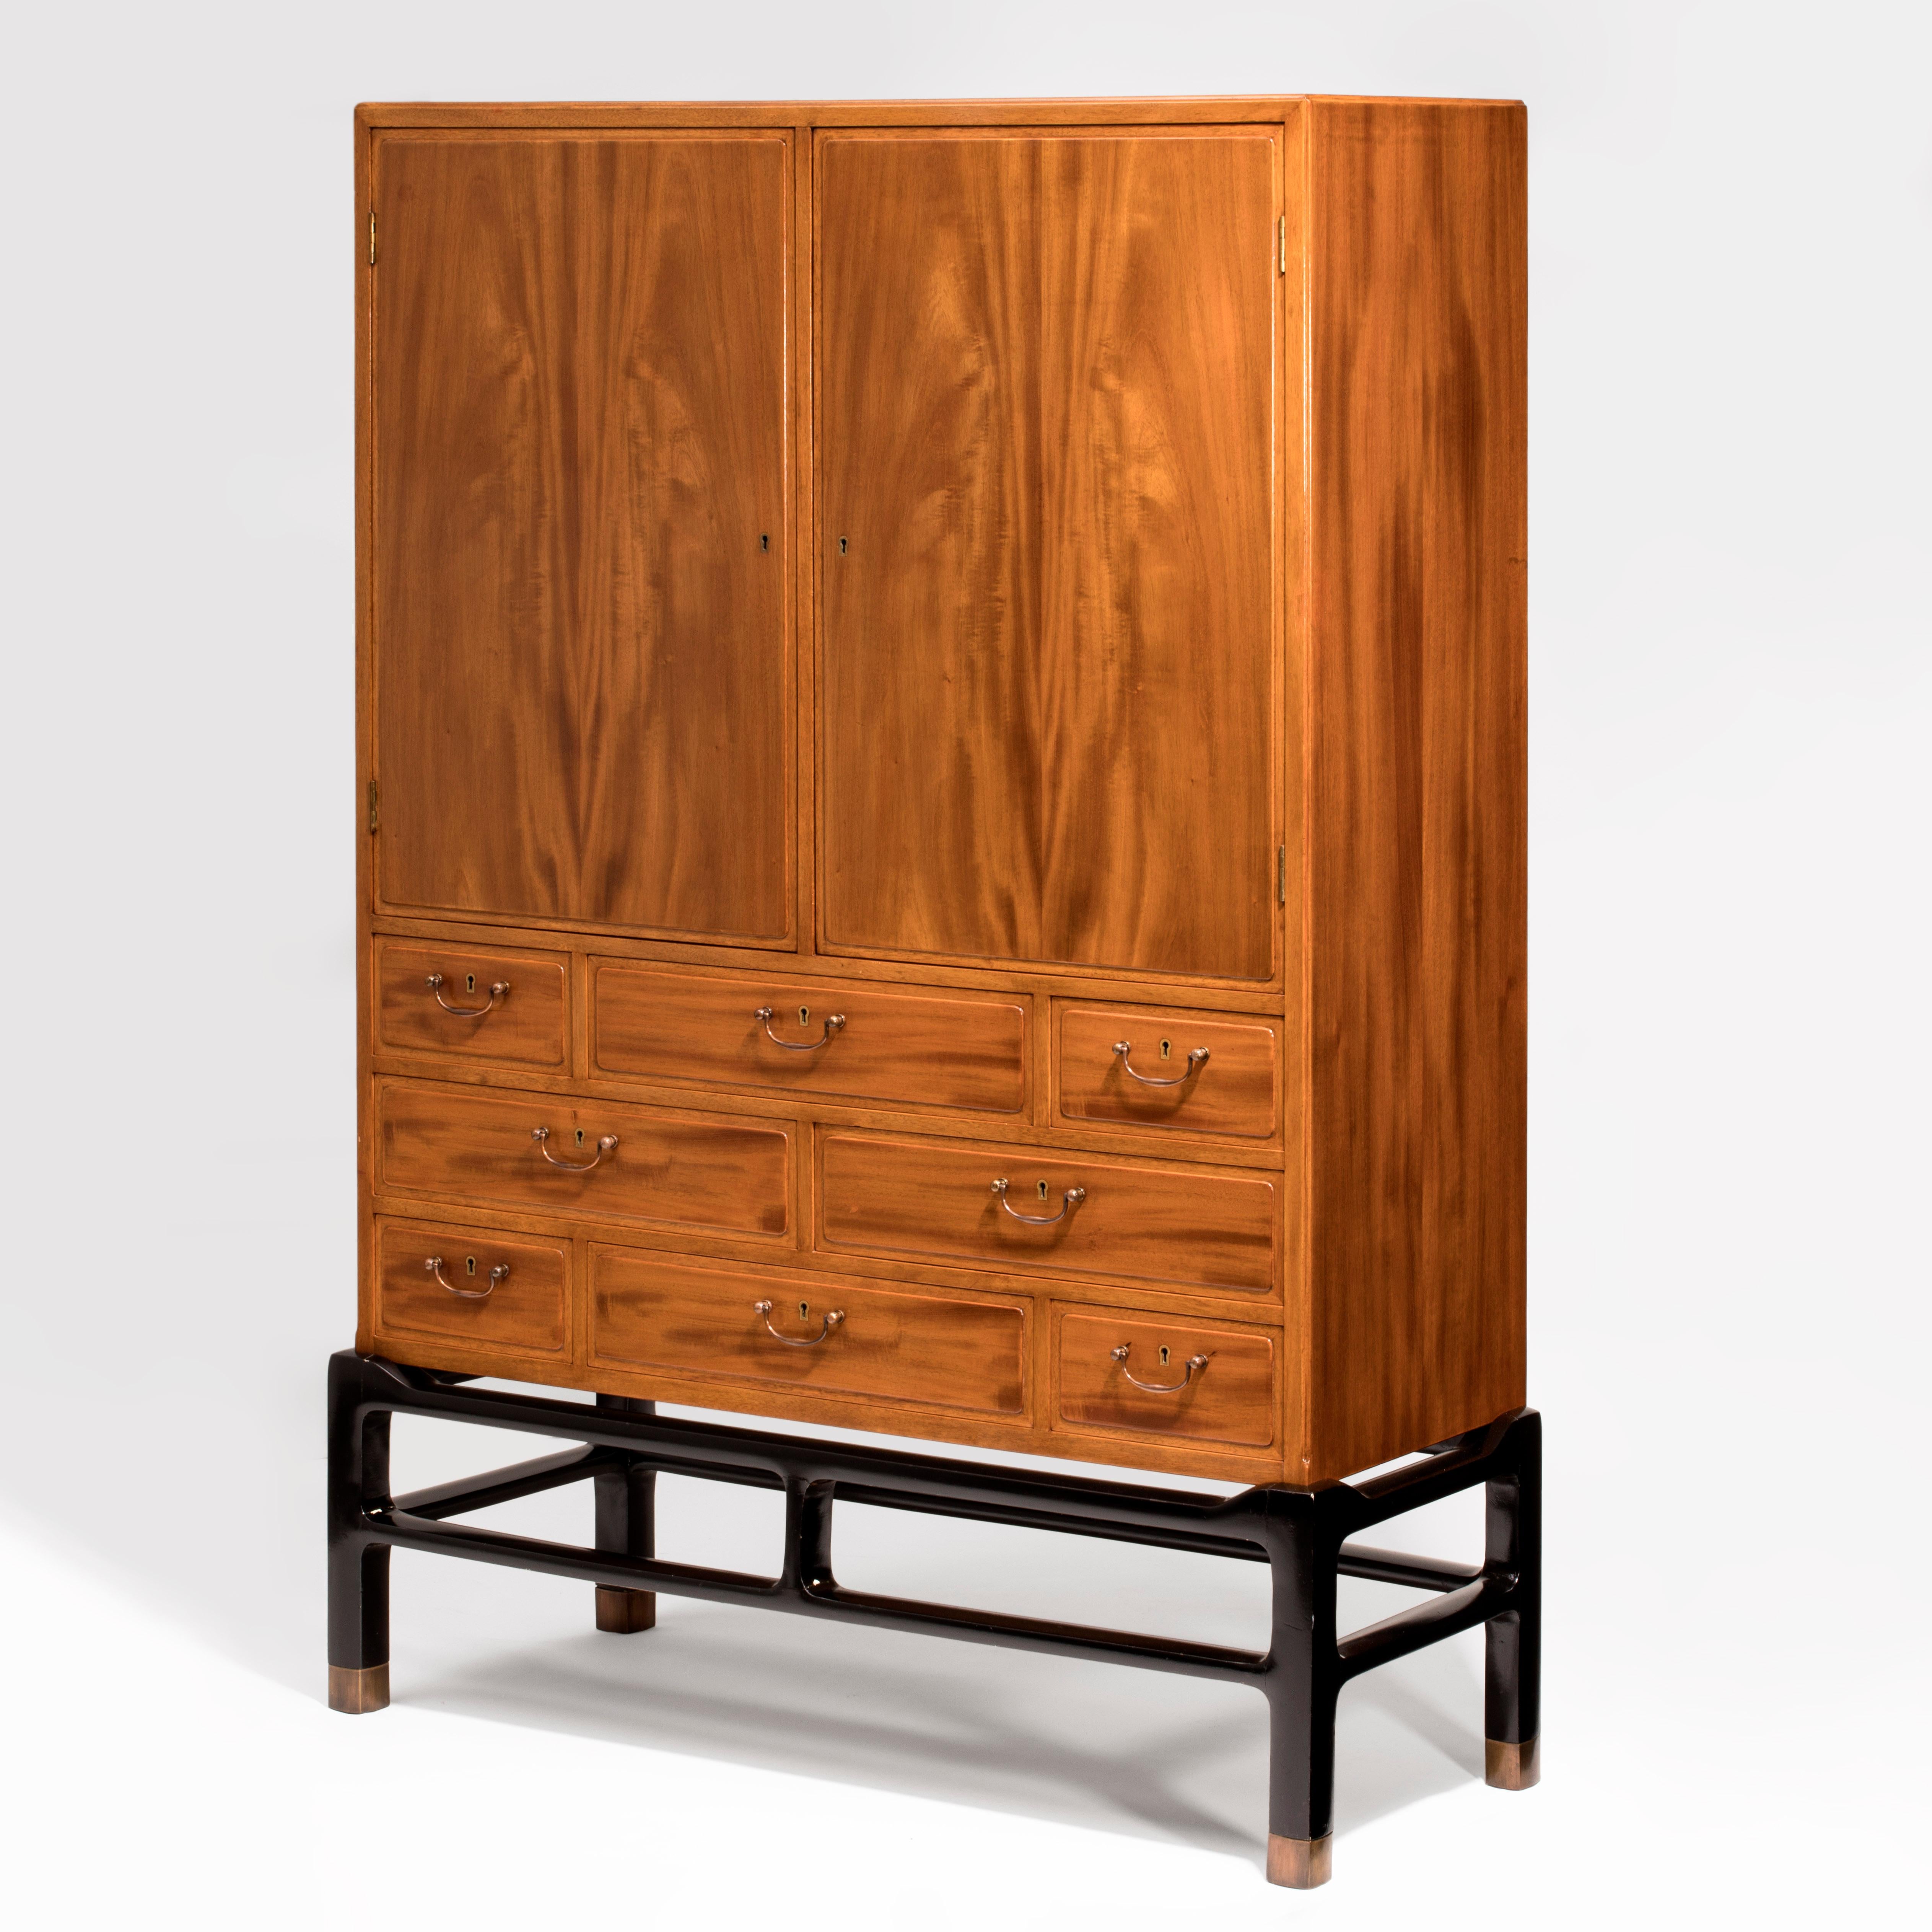 A fine example of Danish craftsmanship, handmade and beautifully detailed by master cabinetmaker William Christensen. The cabinet is a rare example; it is the only known piece by Berg executed in carefully selected, silky, fine-grained Honduras